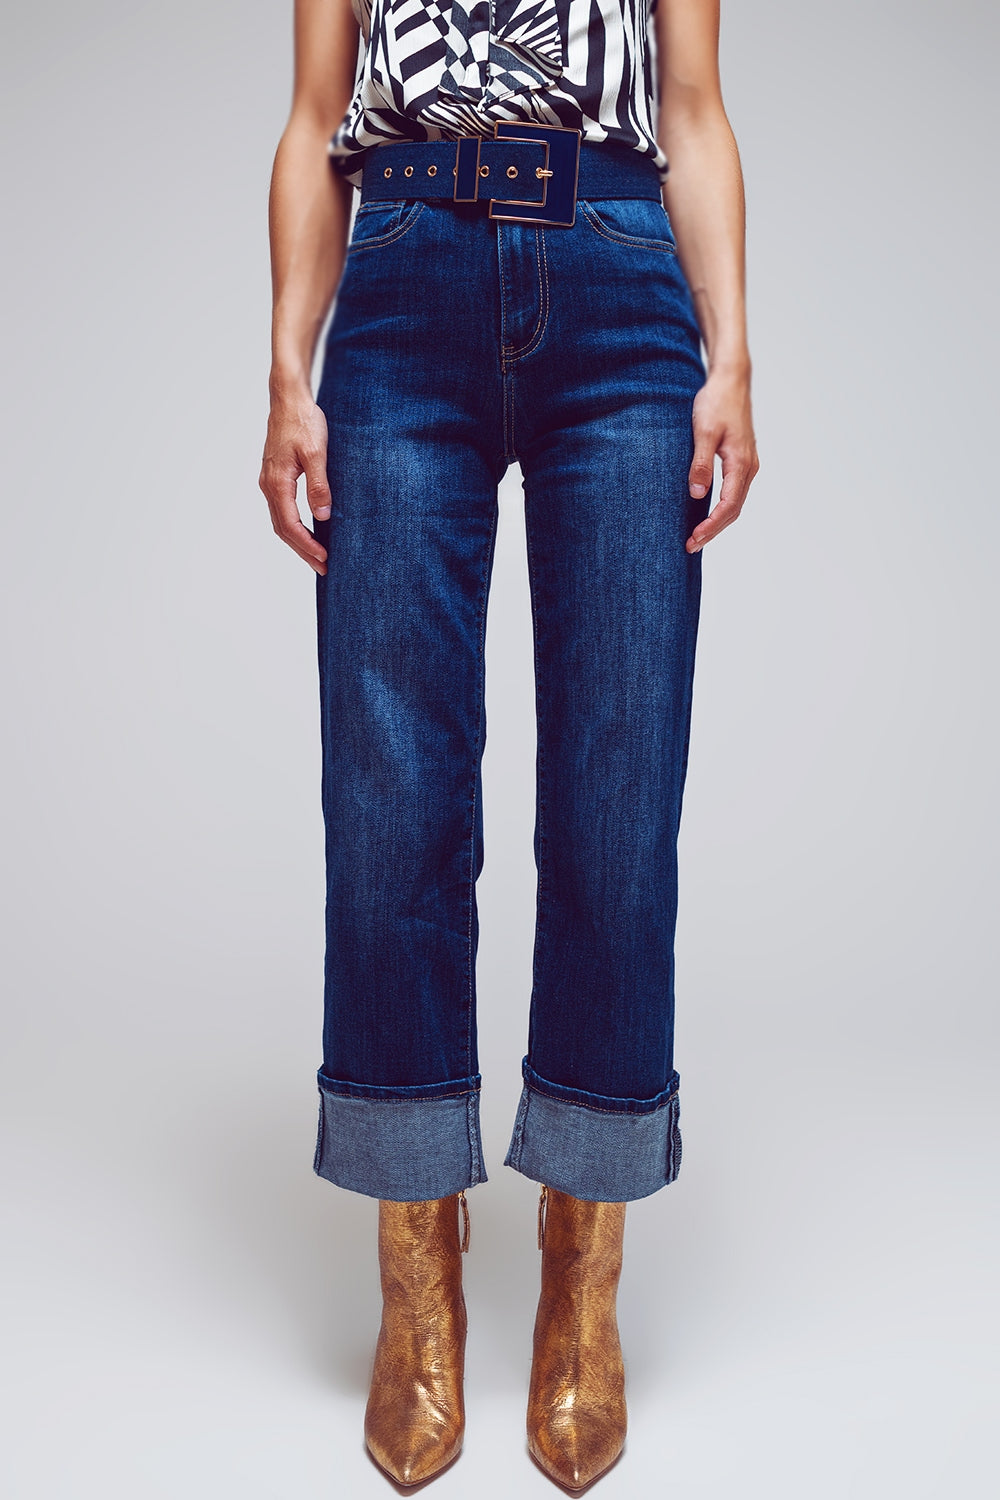 Q2 Straight Jeans with Folded Hem in Mid Blue Wash